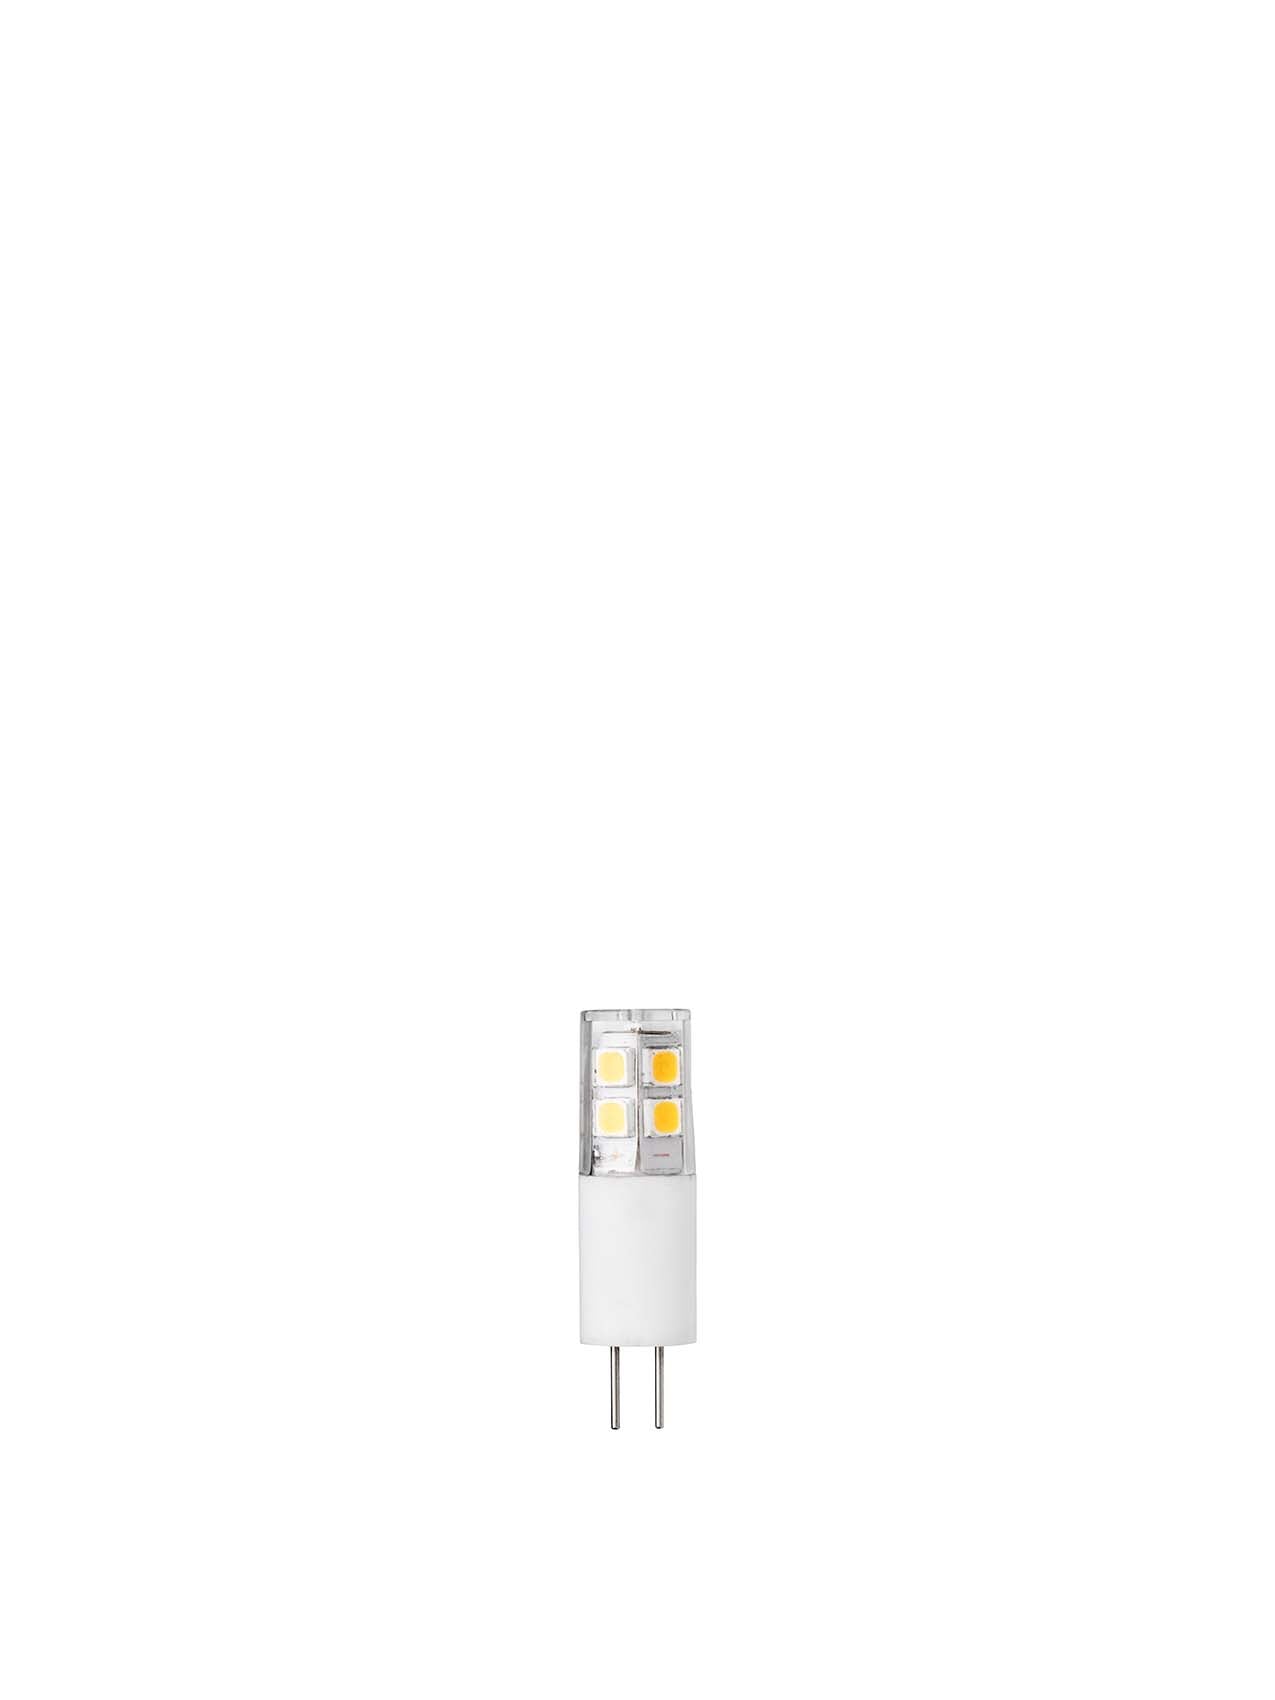 Dimmable Led Lamps G4, Led G4 12v Dimmable